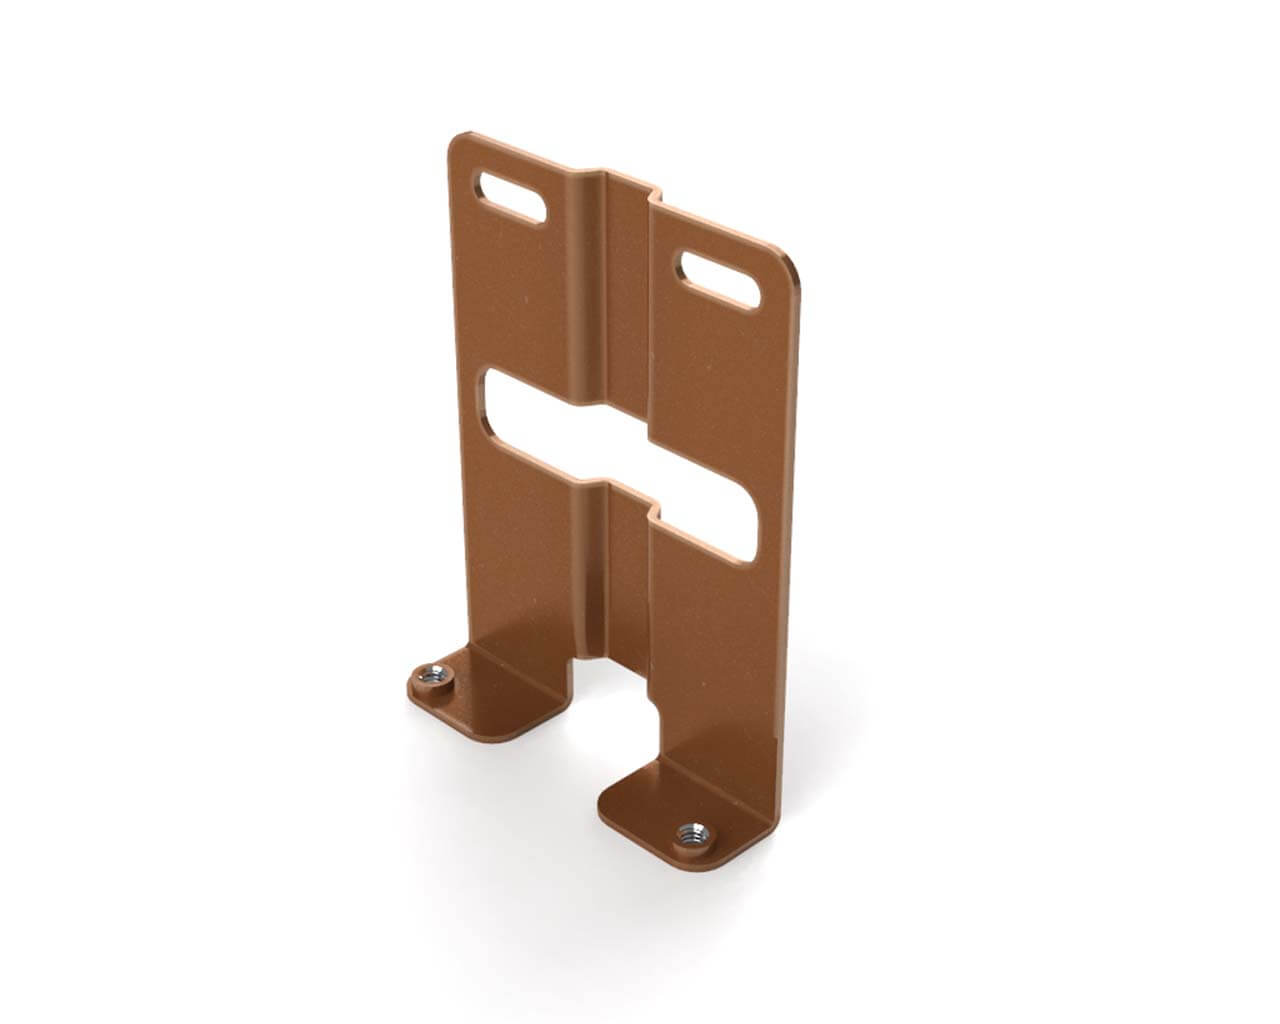 PrimoChill SX Upright CTR2 Mount Bracket - PrimoChill - KEEPING IT COOL Copper